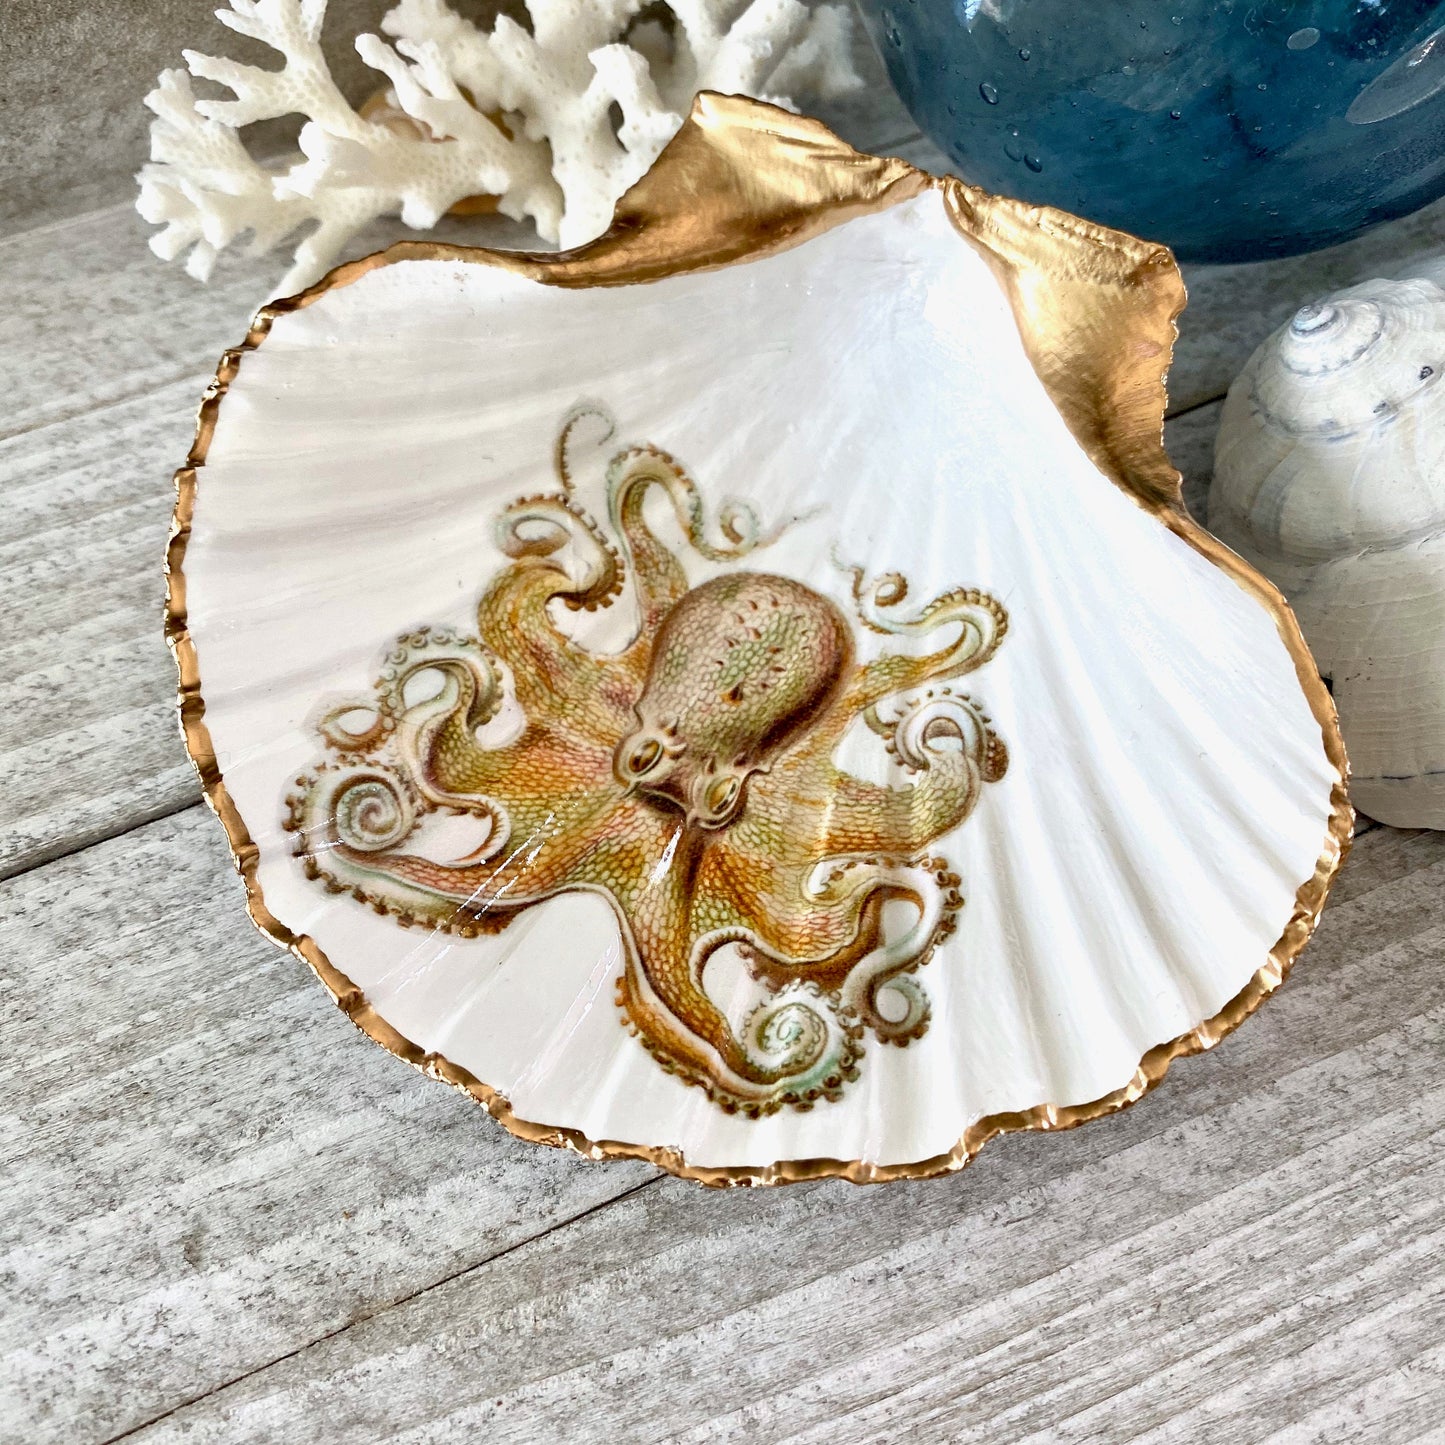 Golden Octopus Scallop Ring Dish